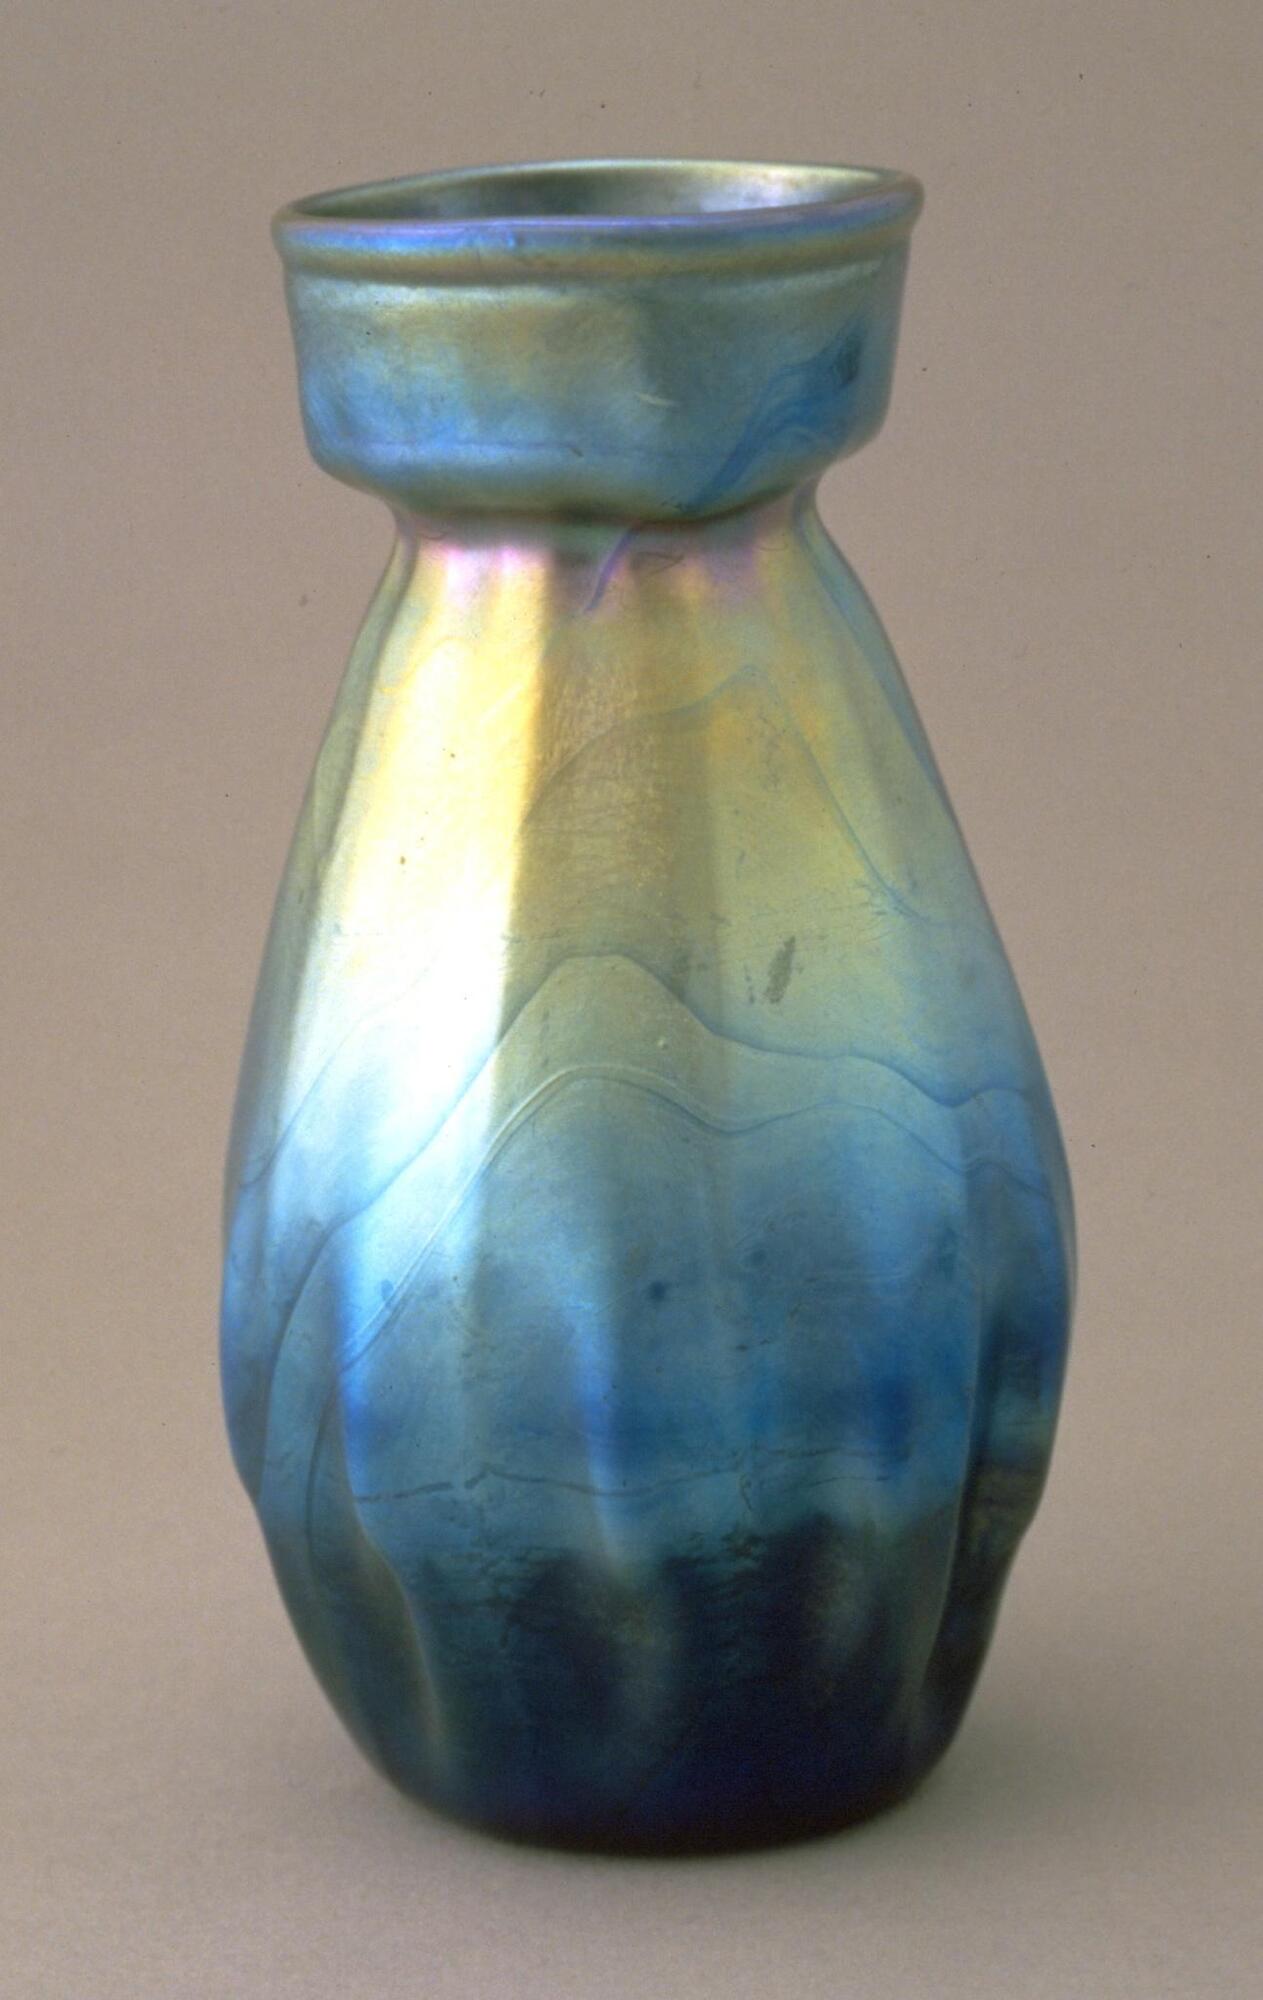 Iridescent blue, silver and yellowish-green glass vessel with egg-shaped body and the suggestion of lobes near the bottom half of the vessel tapering into eight flat sides towards the upper half. Vessel is topped by a soft-edged open-ended cube-like form.